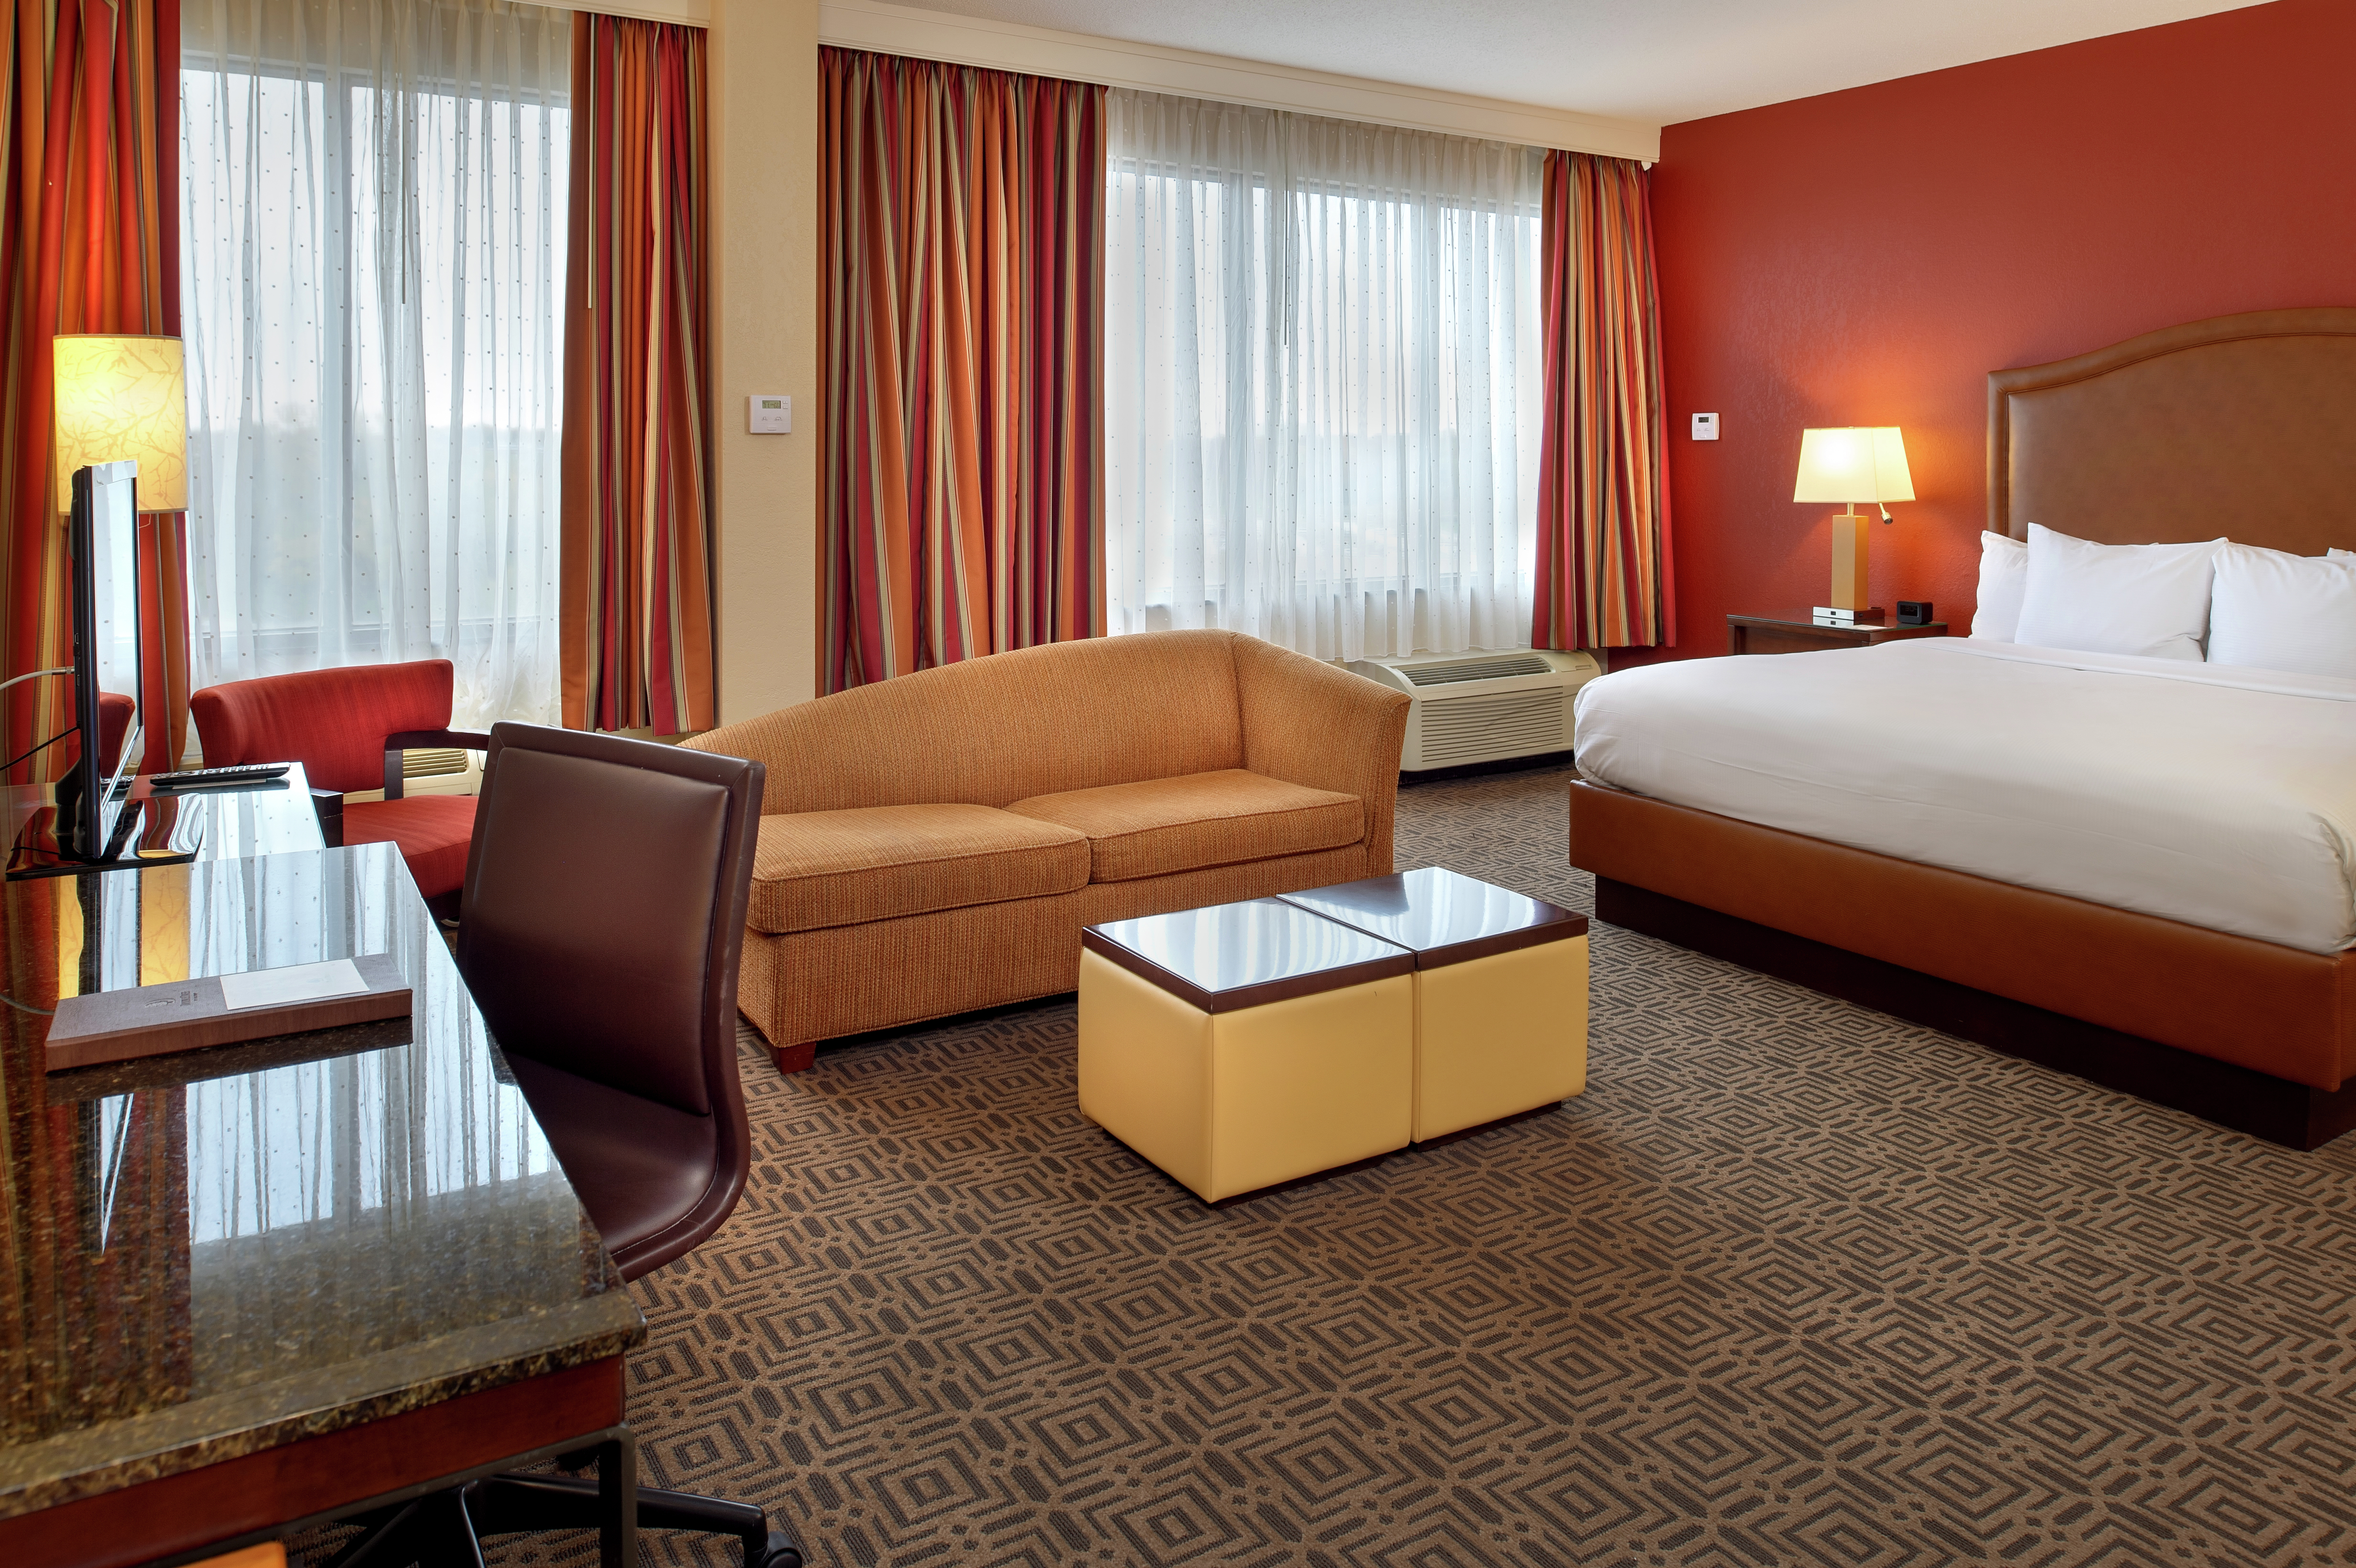 King Junior Suite with Bed, Lounge Area, Work Desk, and Room Technology